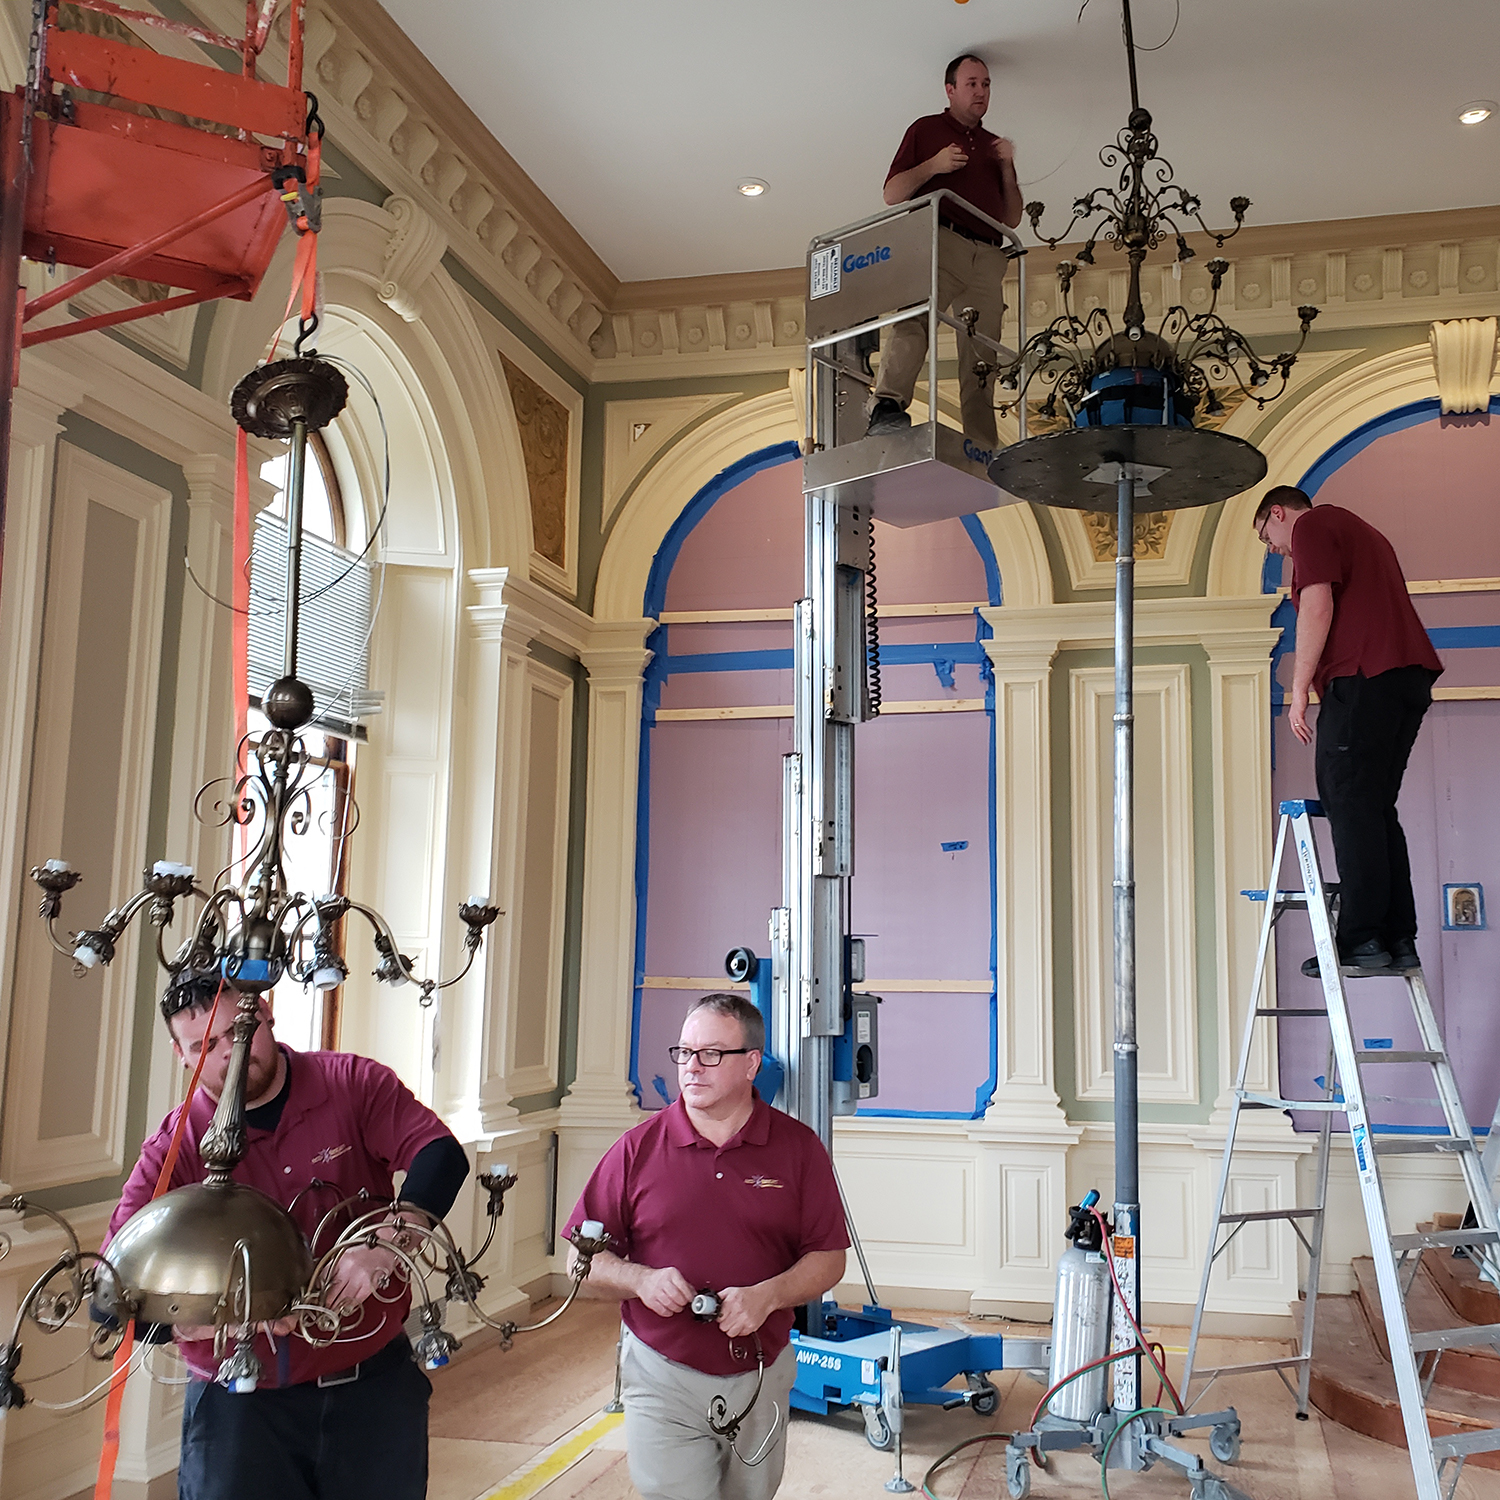 Chandelier removal, installation, and storage